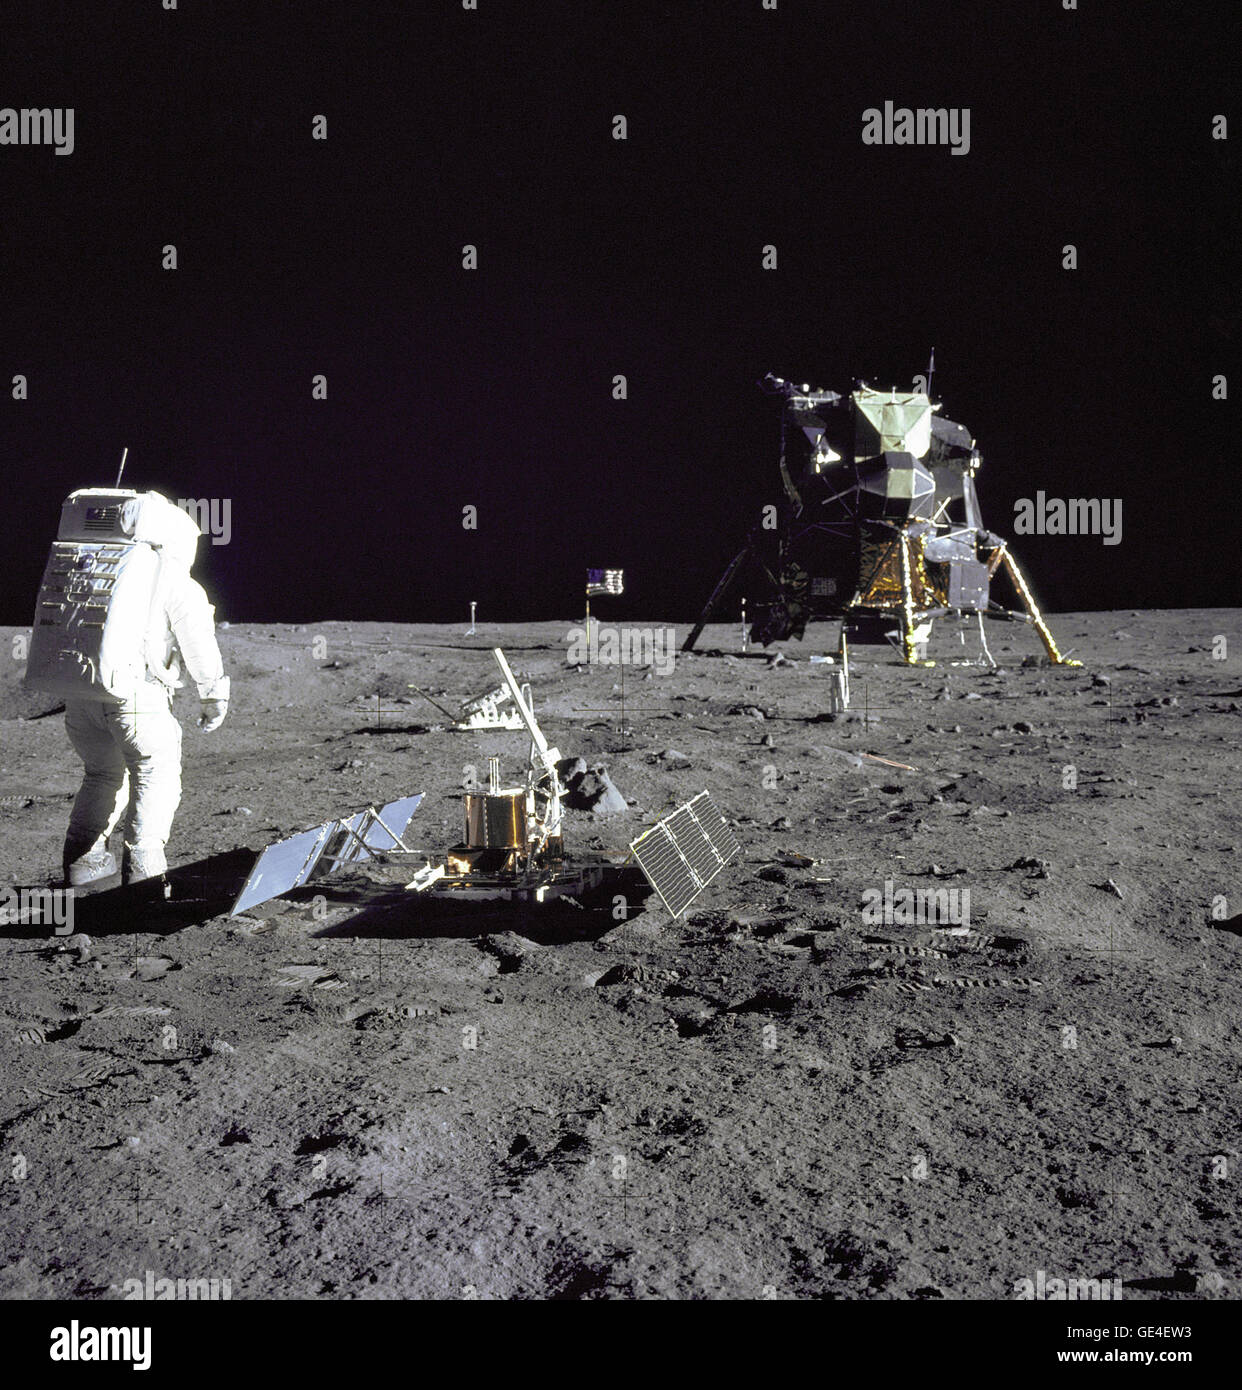 (July 20, 1969) Astronaut Edwin E.&quot;Buzz&quot; Aldrin Jr., Lunar Module pilot, is photographed during the Apollo 11 extravehicular activity on the Moon. He has just deployed the Early Apollo Scientific Experiments Package (EASEP). In the foreground is the Passive Seismic Experiment Package (PSEP); beyond it is the Laser Ranging Retro-Reflector (LR-3); in the center background is the United States flag; in the left background is the black and white lunar surface television camera; in the far right background is the Lunar Module &quot;Eagle&quot;. Astronaut Neil A. Armstrong, commander, took Stock Photo